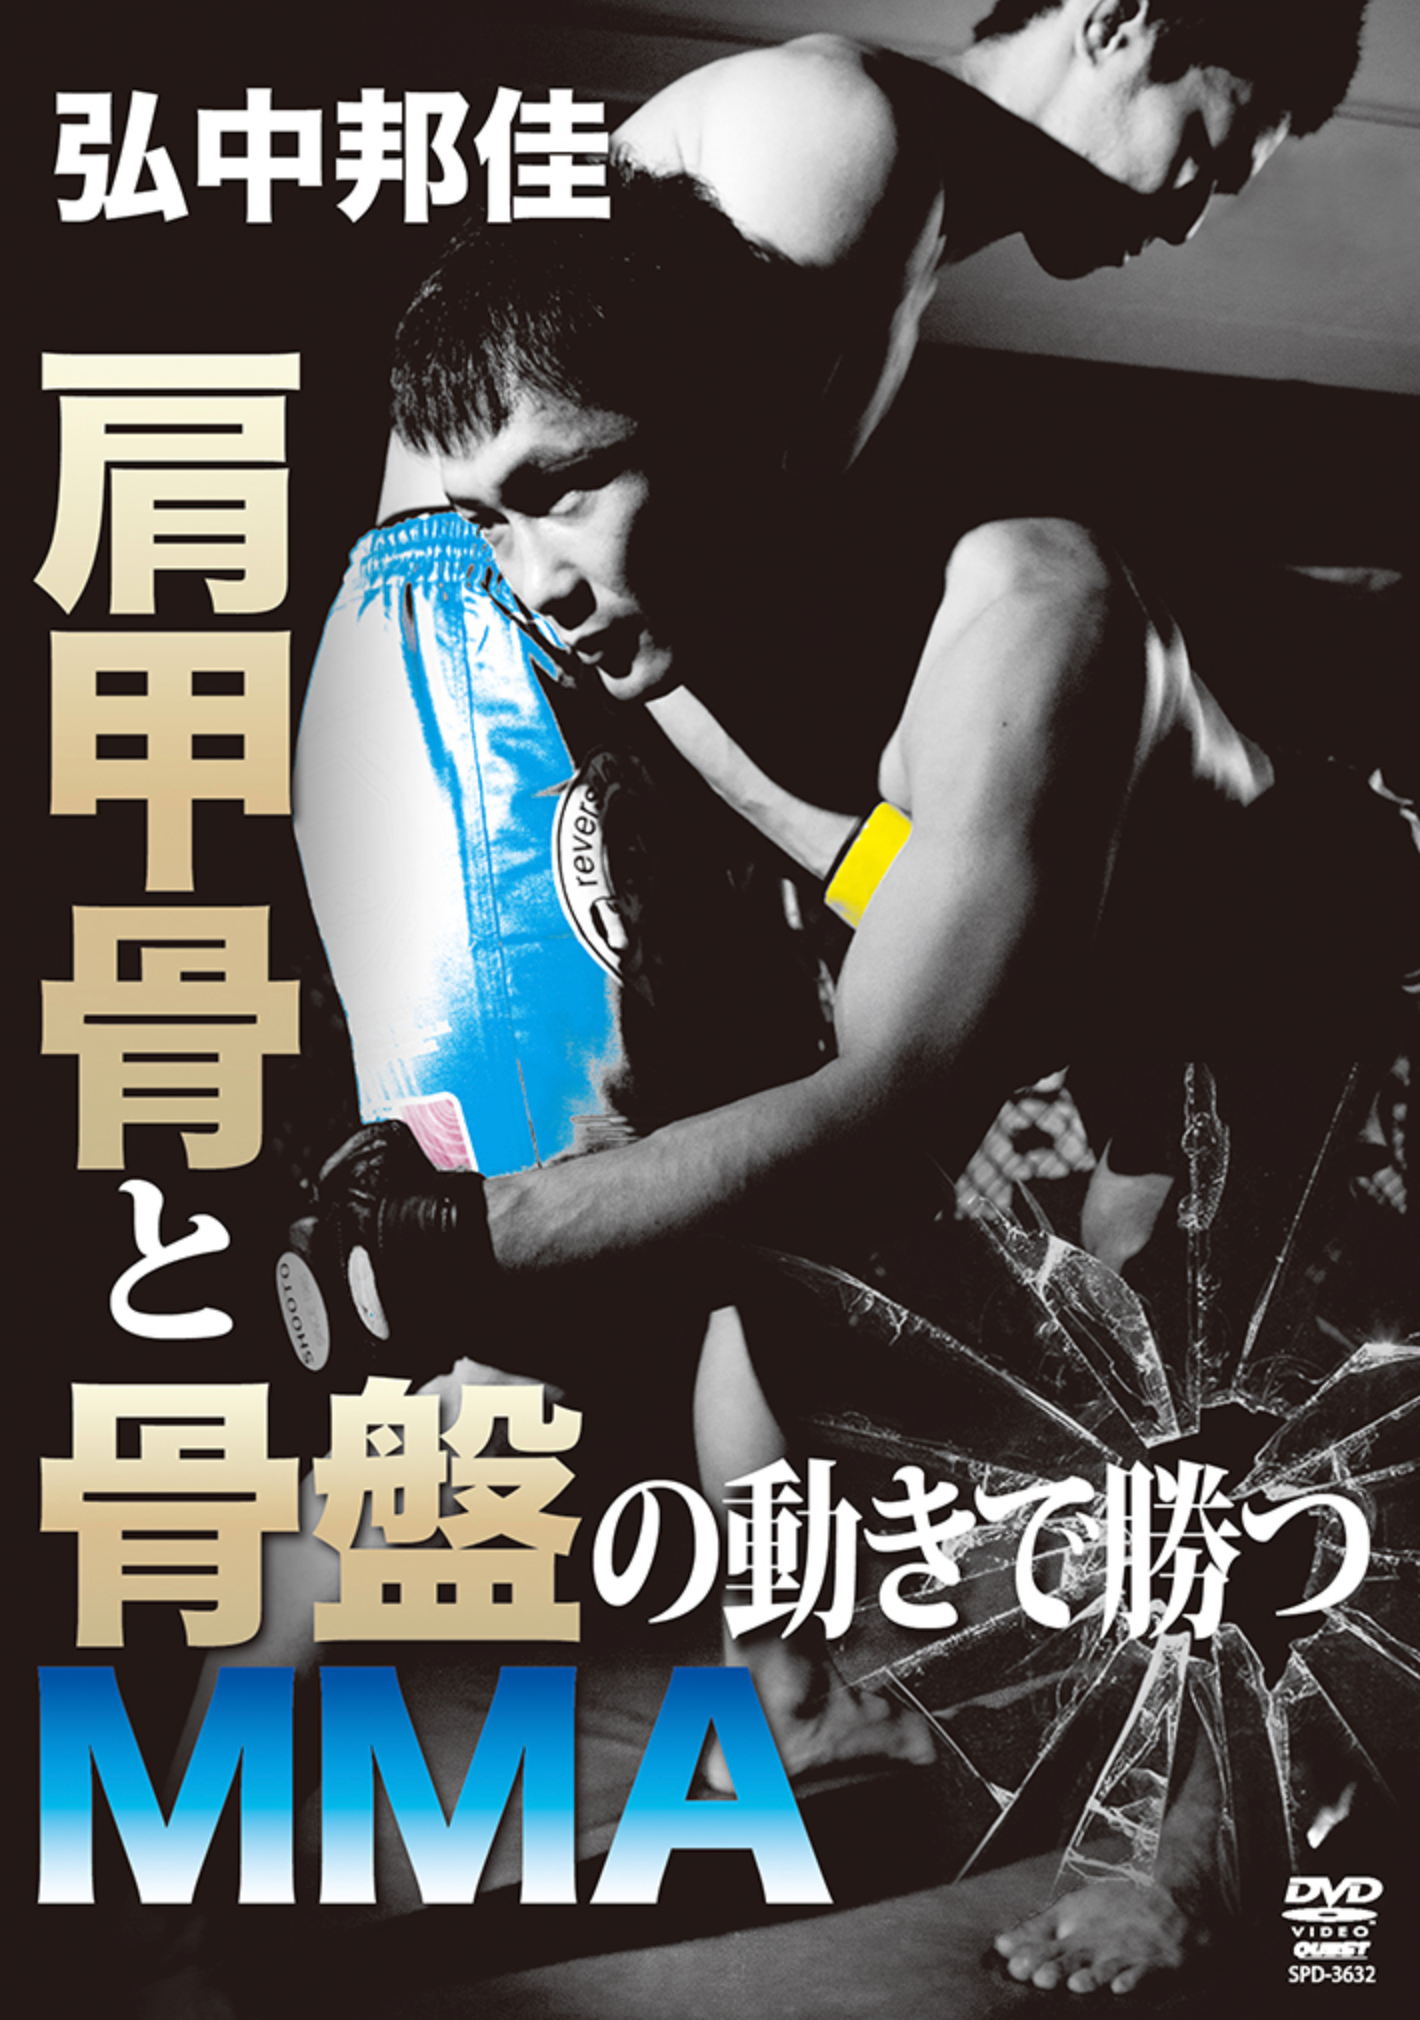 Effective Movement of Hips & Shoulders for MMA DVD by Kuniyoshi Hironaka - Budovideos Inc